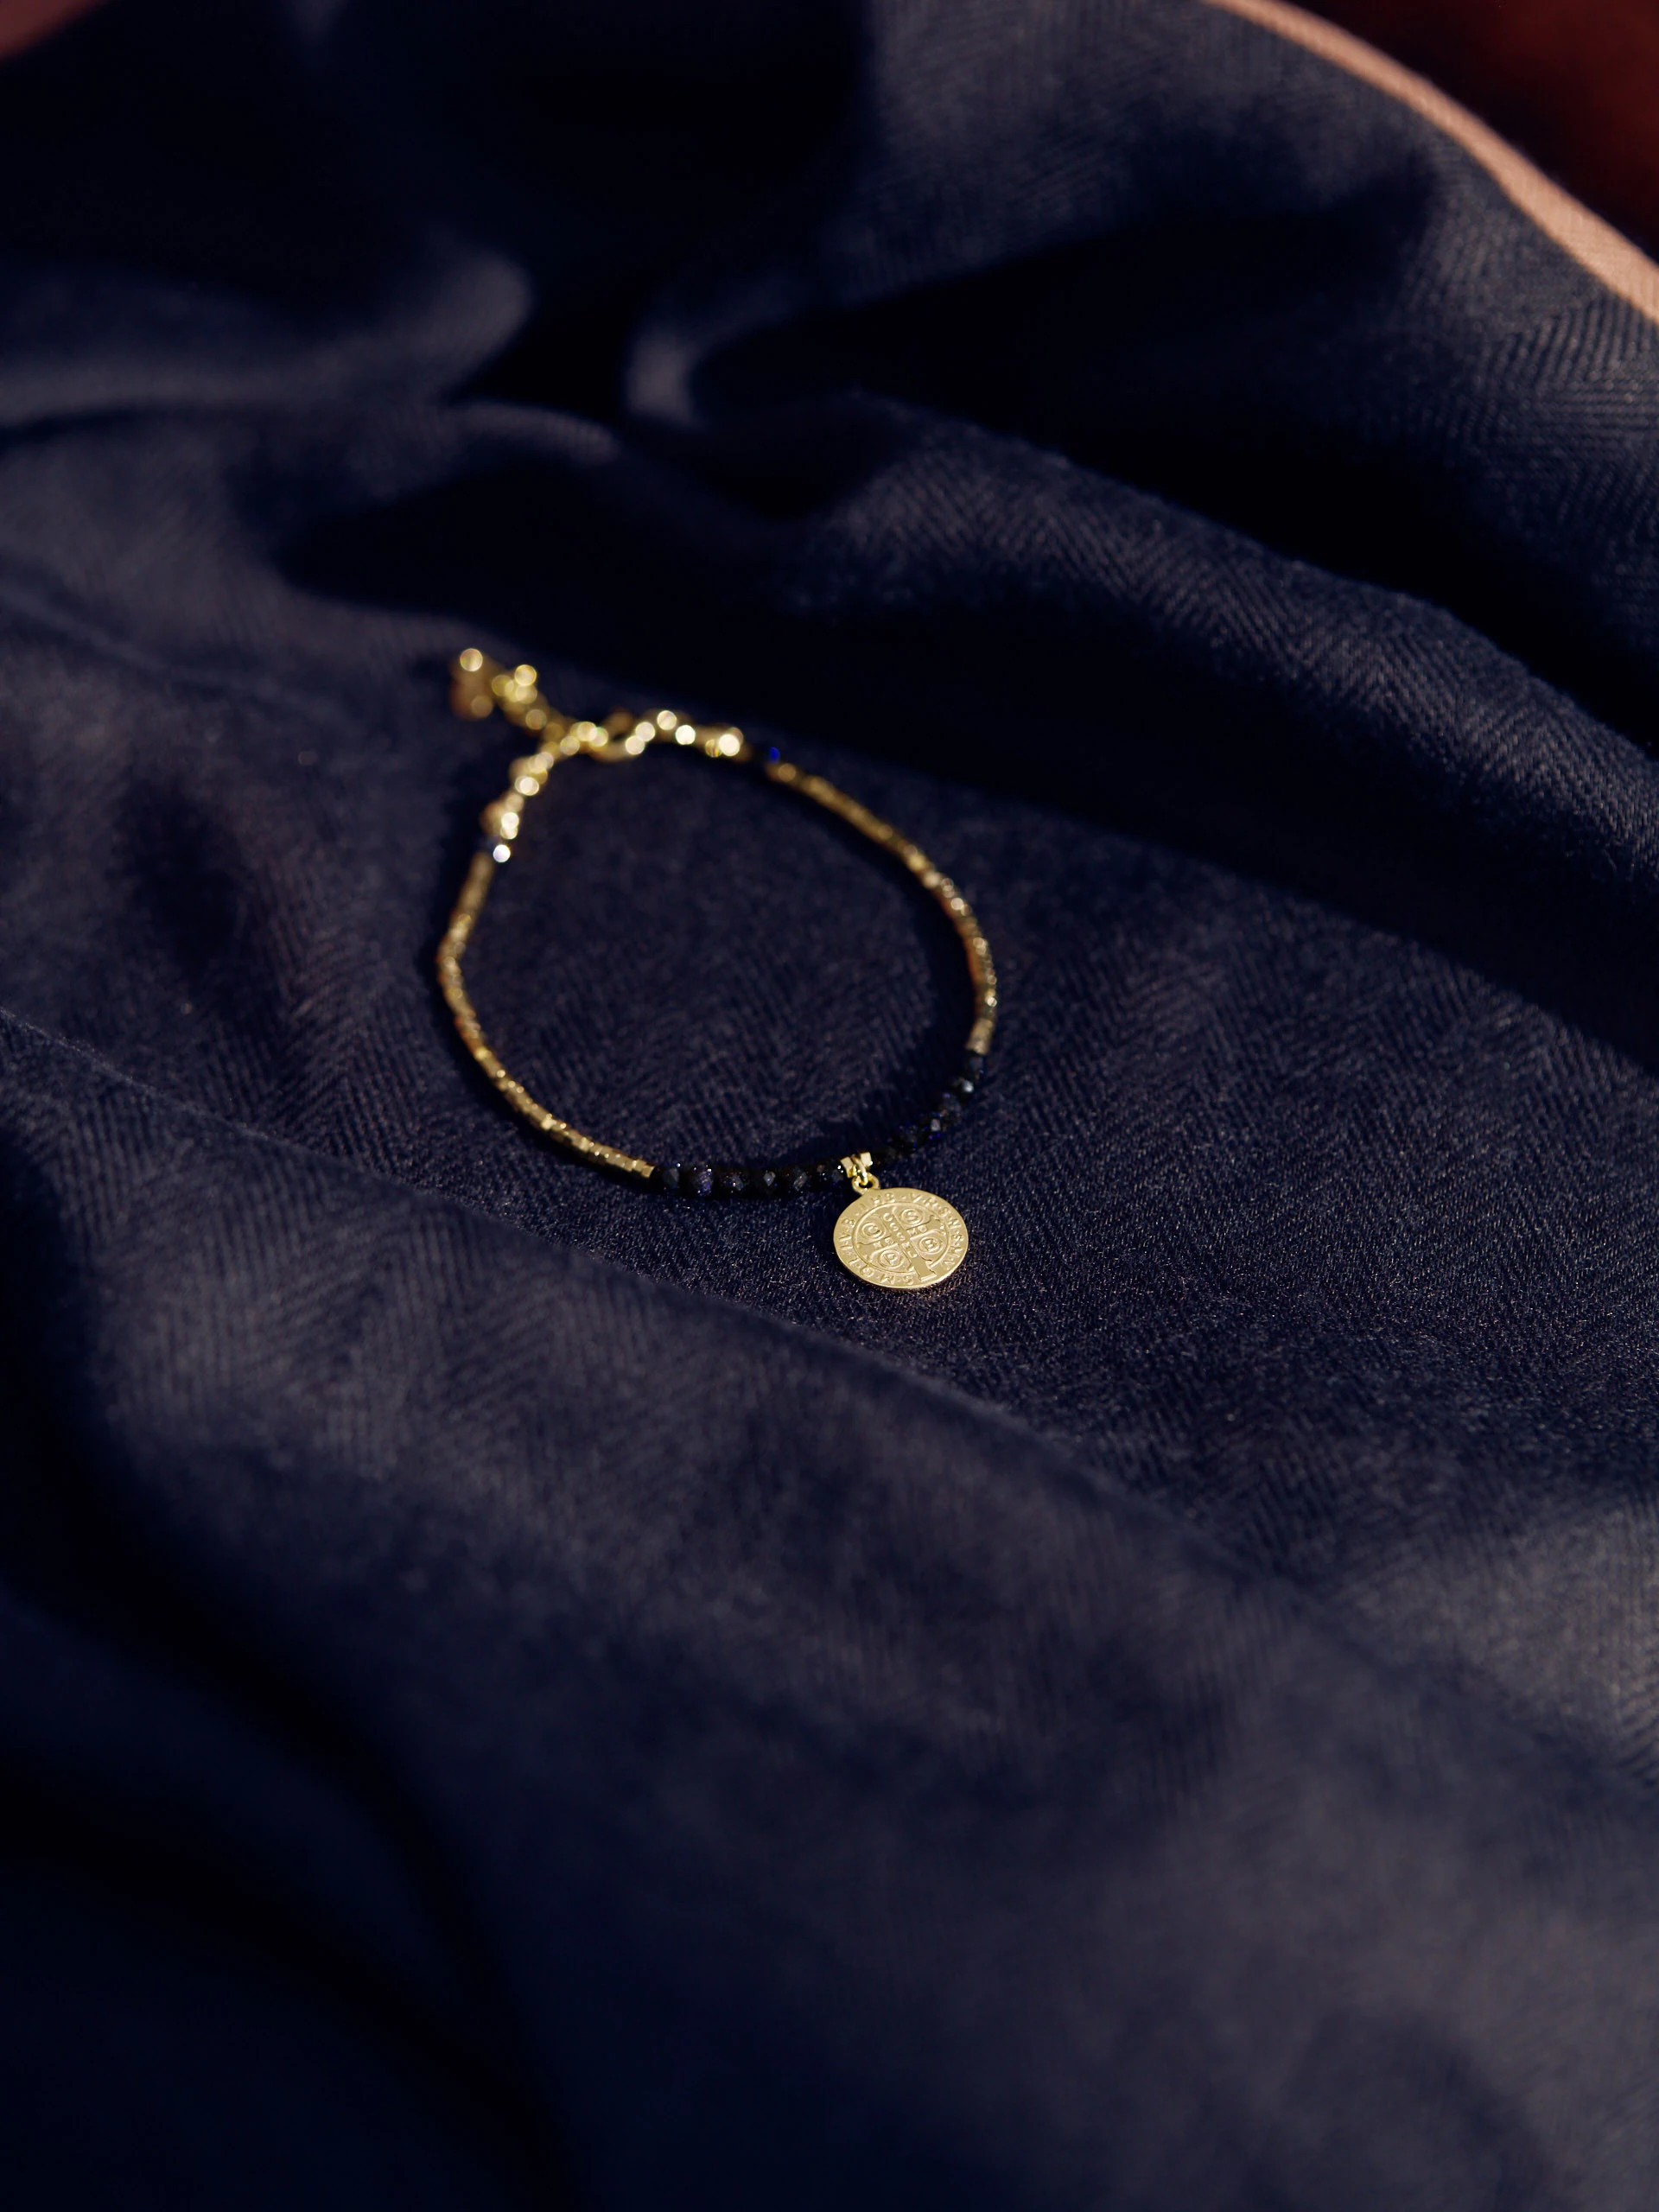 GOLD-PLATED BRACELET WITH NATURAL STONES